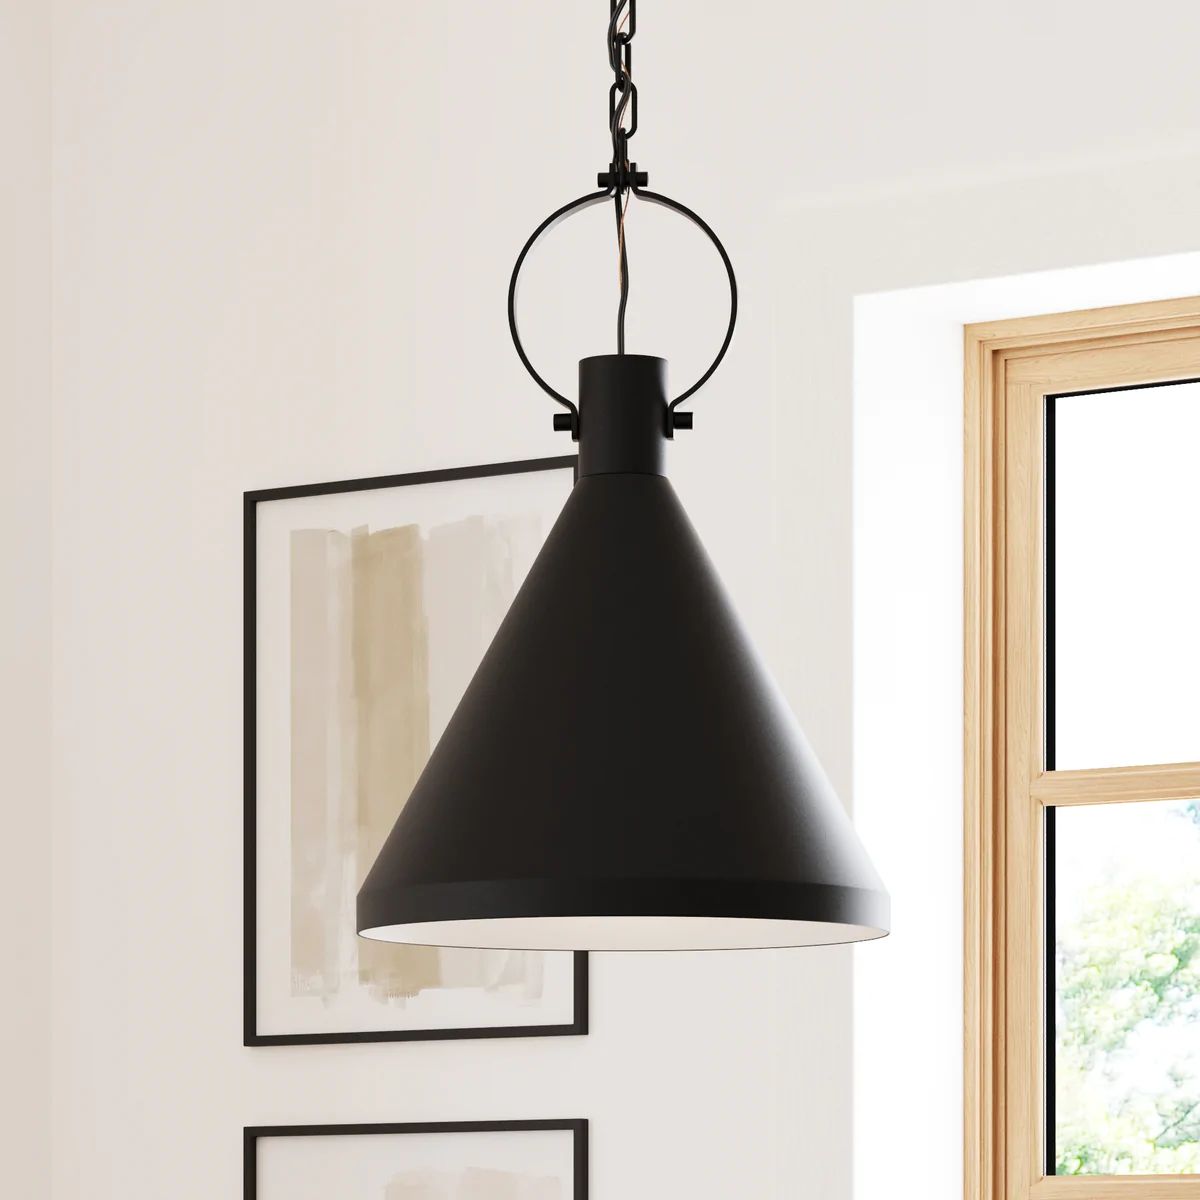 Nate Black Ceiling Pendant Light, Hanging Fixture | With Metal Shade | | Nathan James